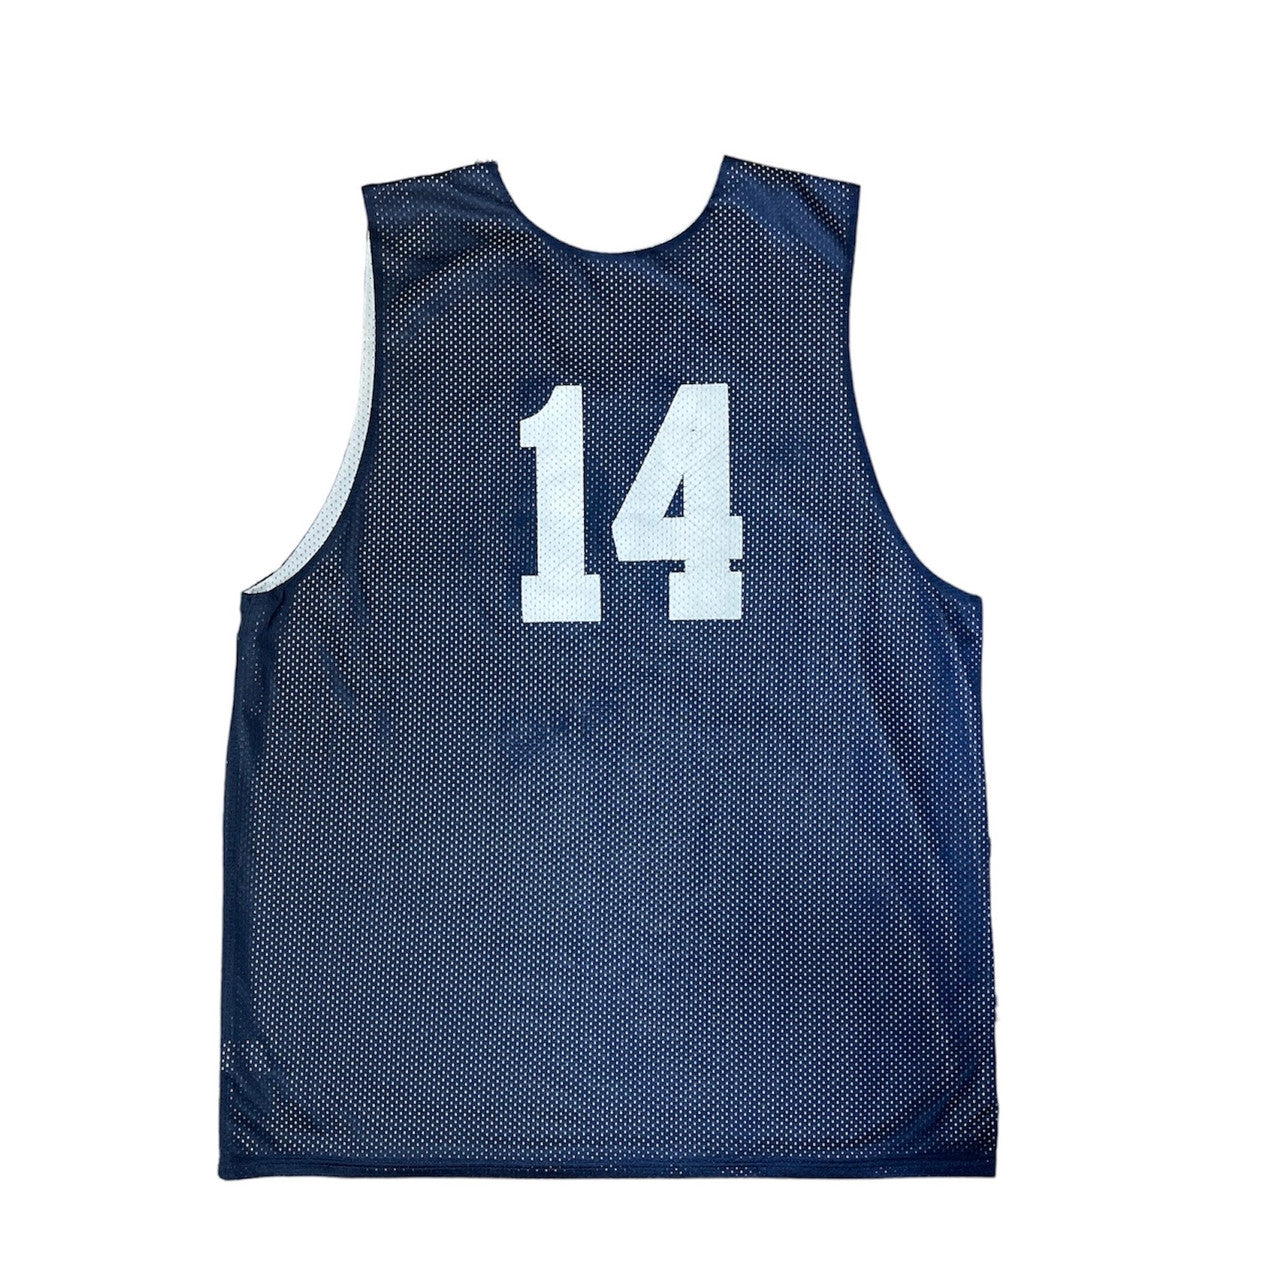 Alleson Athletic Howell Reversible Basketball Jersey